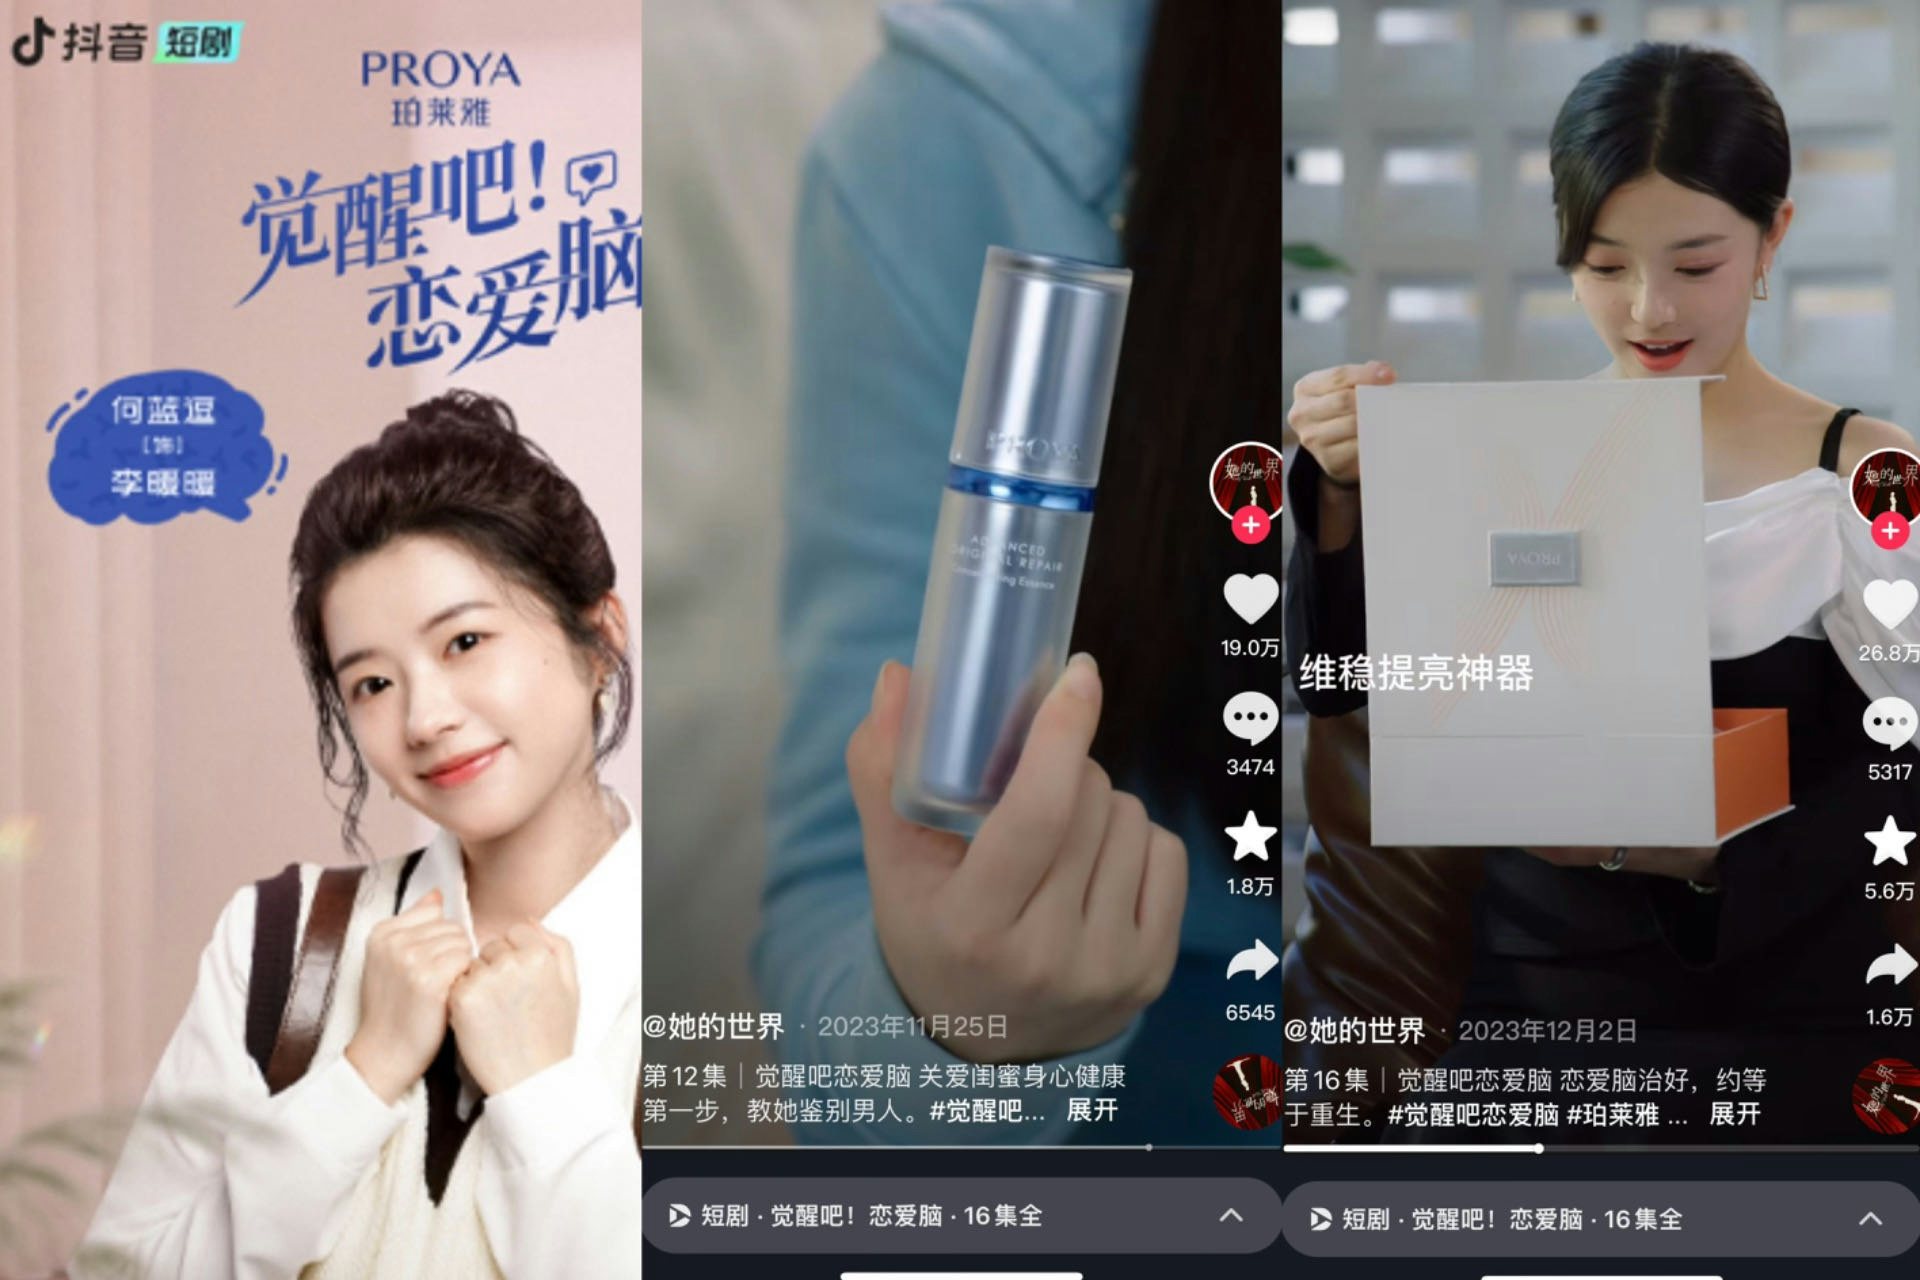 Mini C-drama produced by Proya that showcases the product placement during the short video. Image: Proya